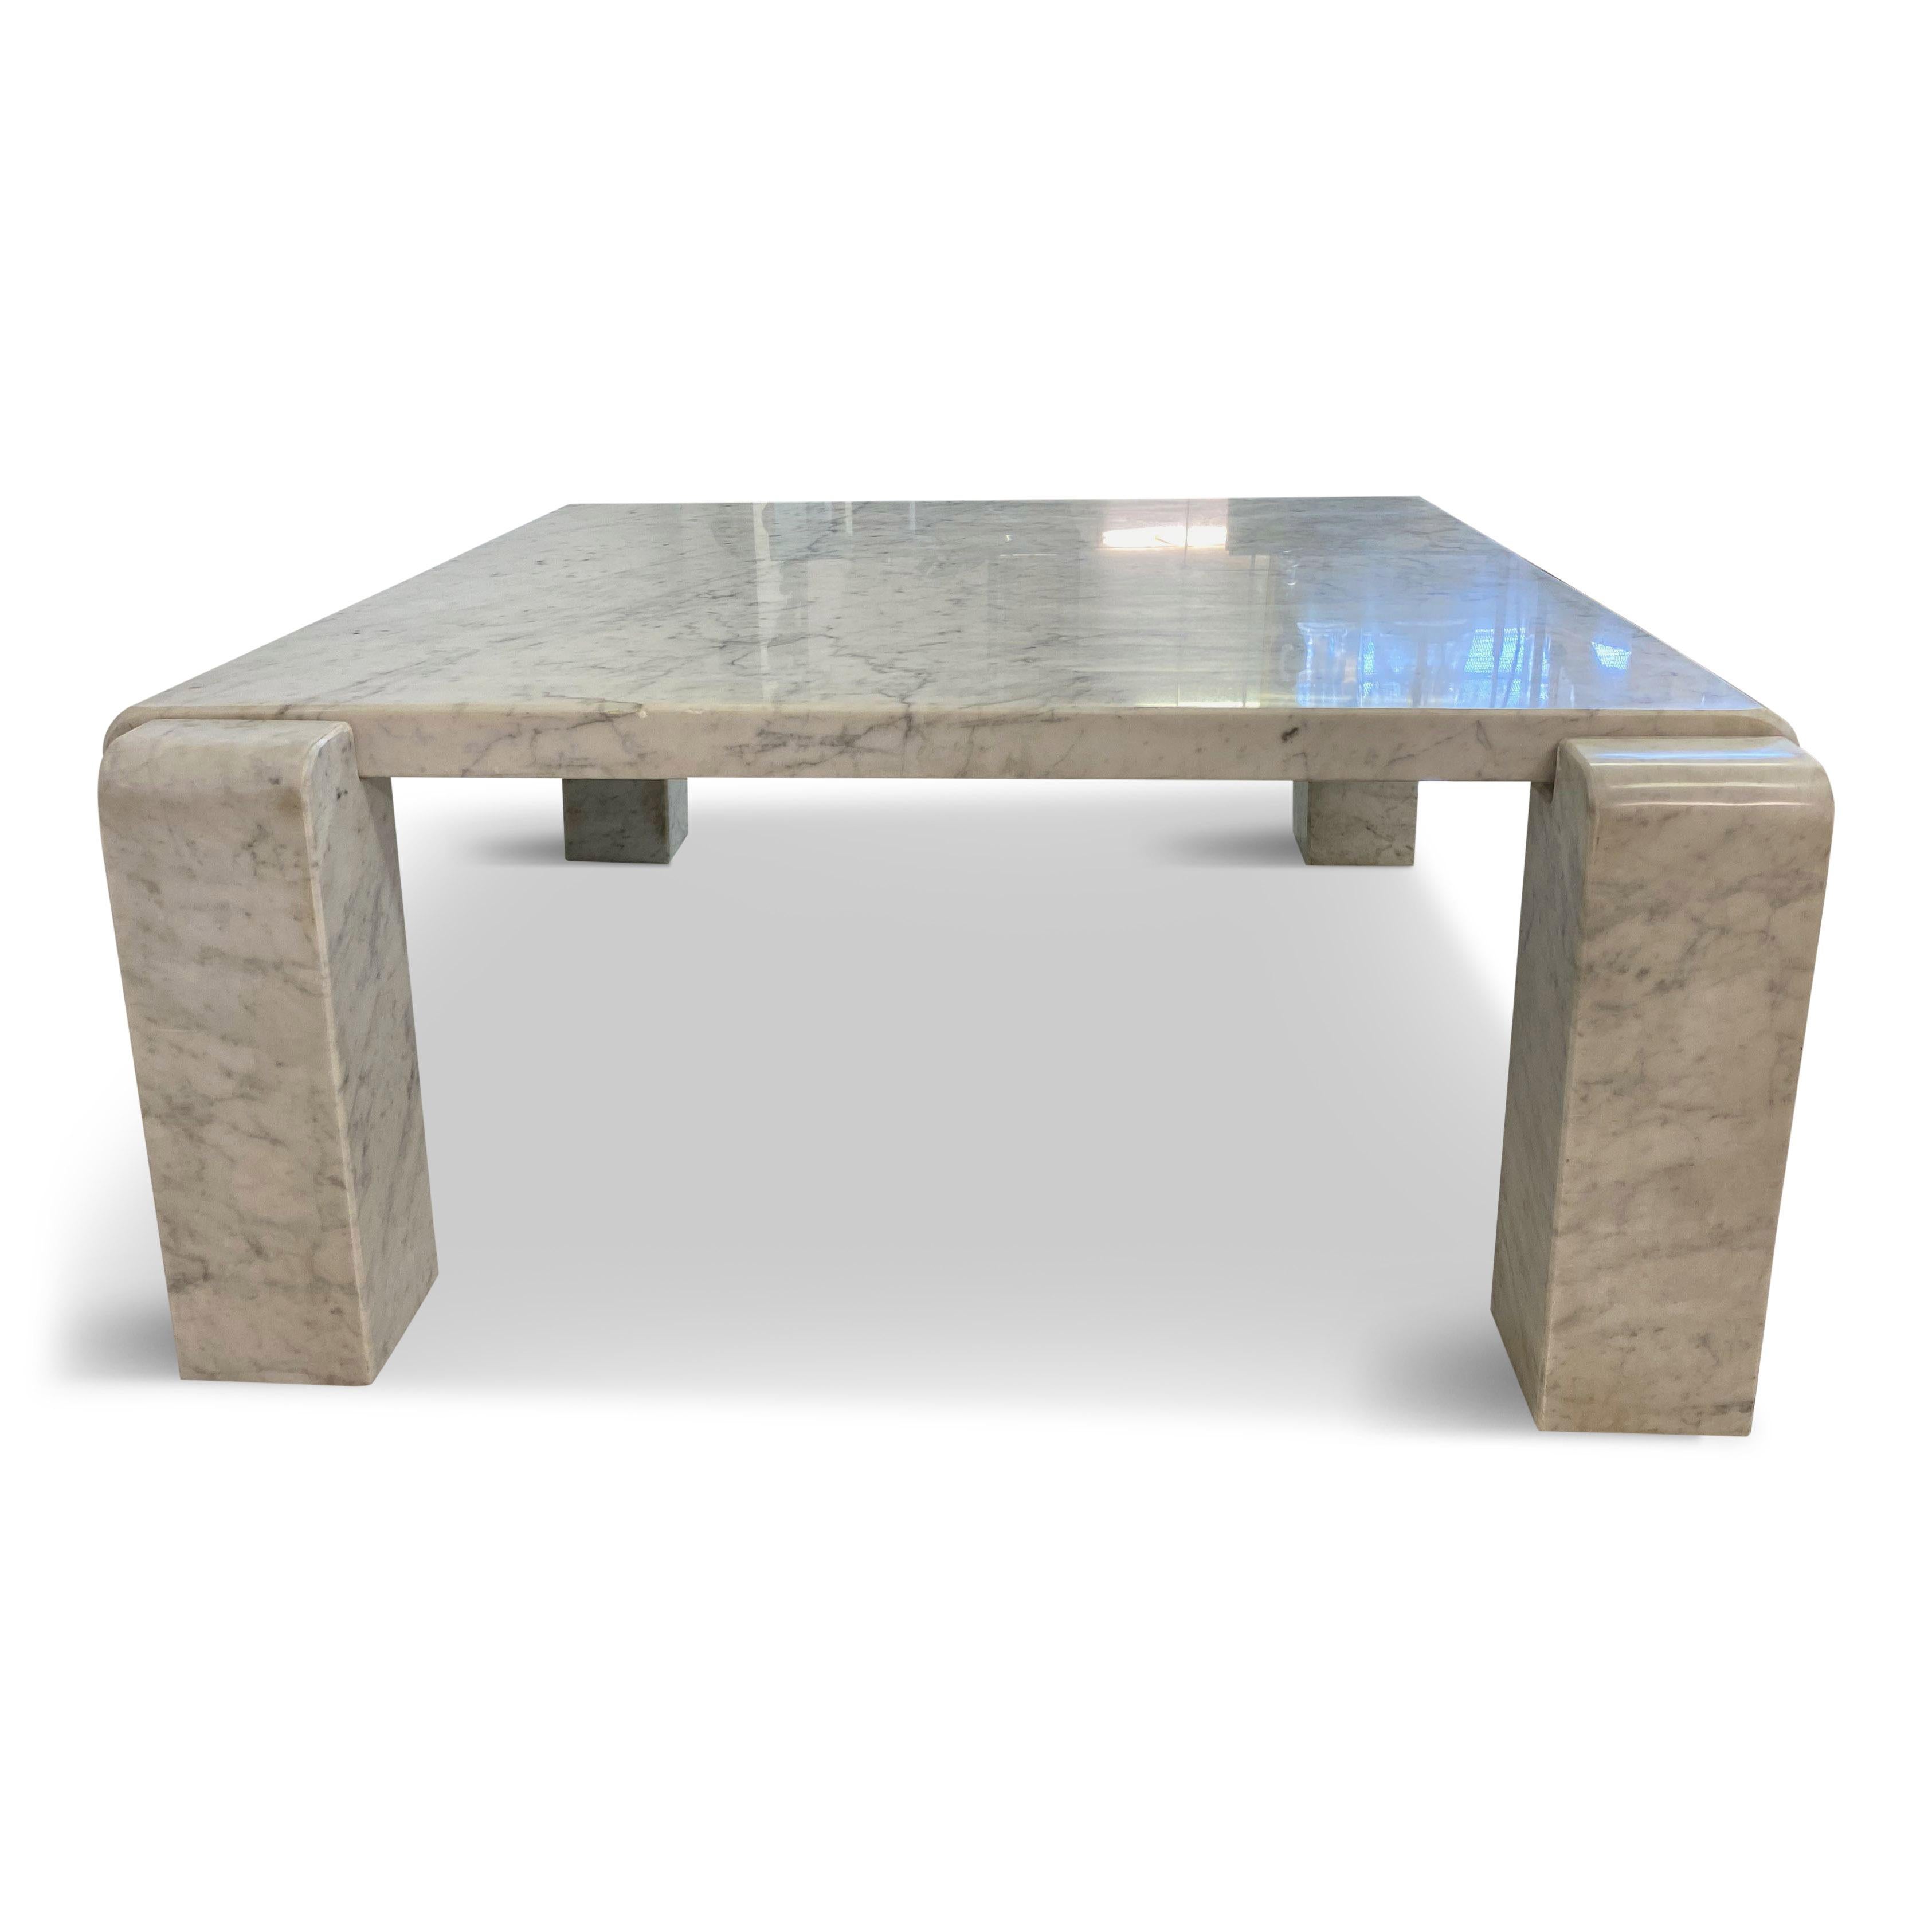 Carrara marble coffee table

By Skipper

Four solid legs

Moveable legs (see photos)

1970s Italian.